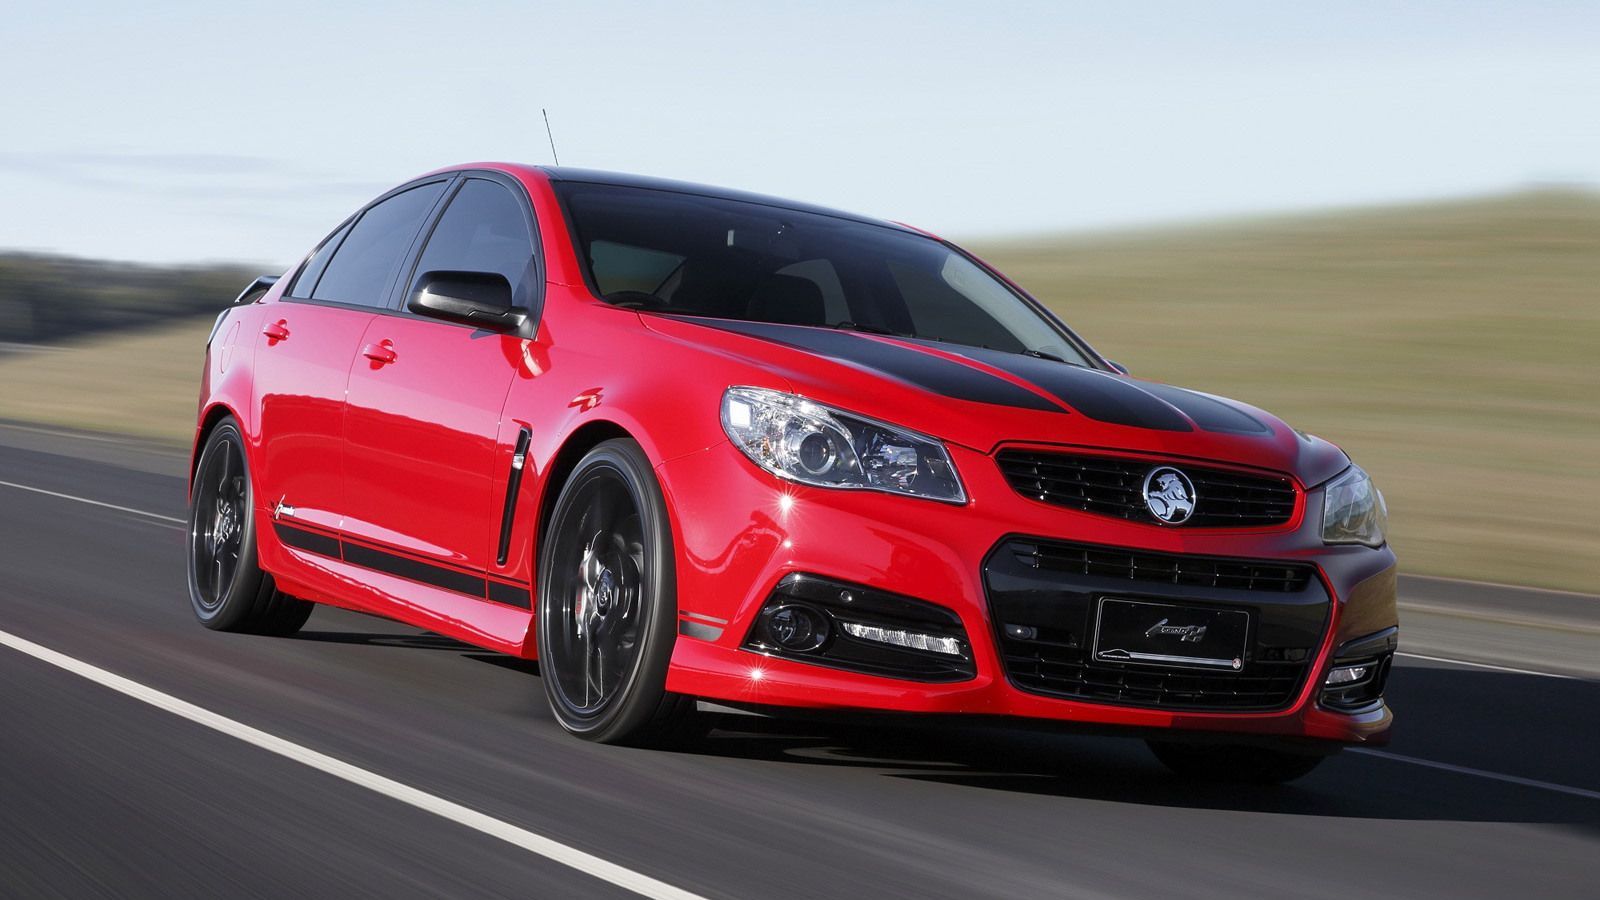 2015 Holden Commodore SSV Craig Lowndes Special Edition